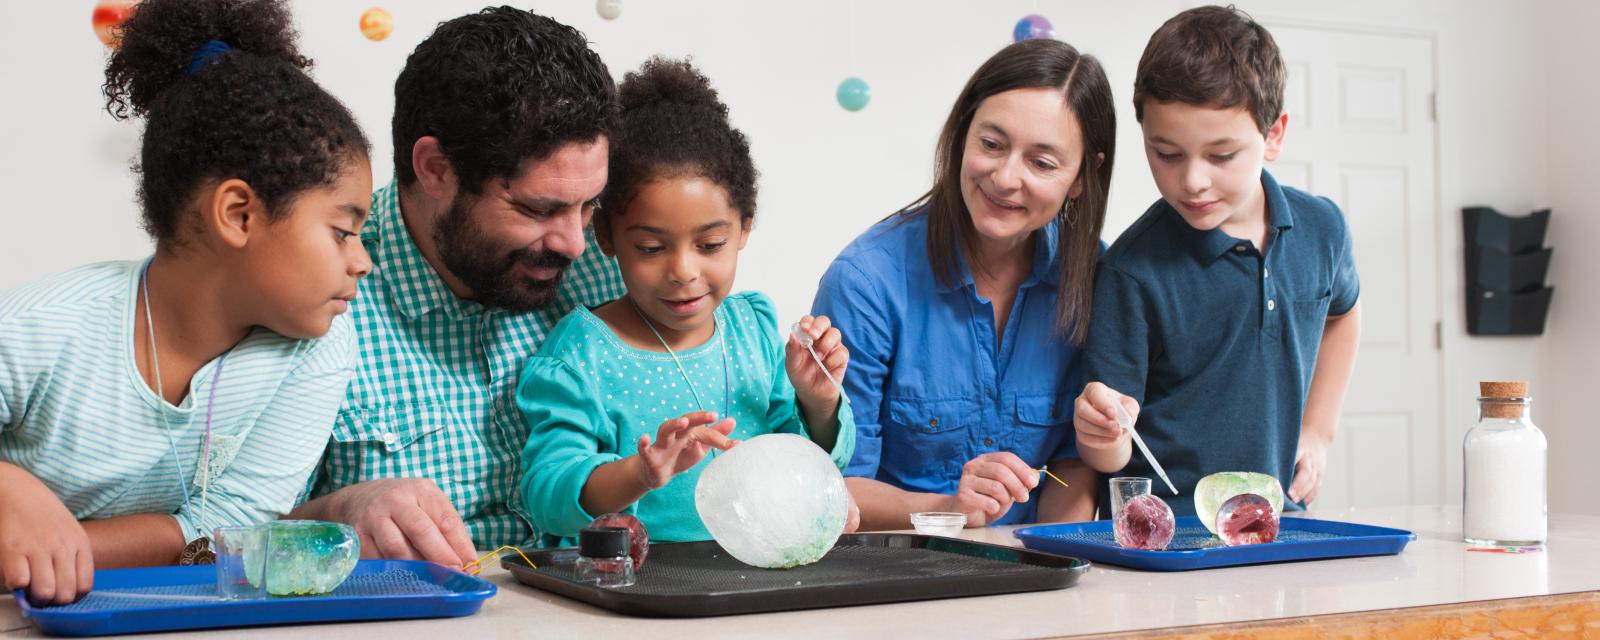 family looking at icy orb activity